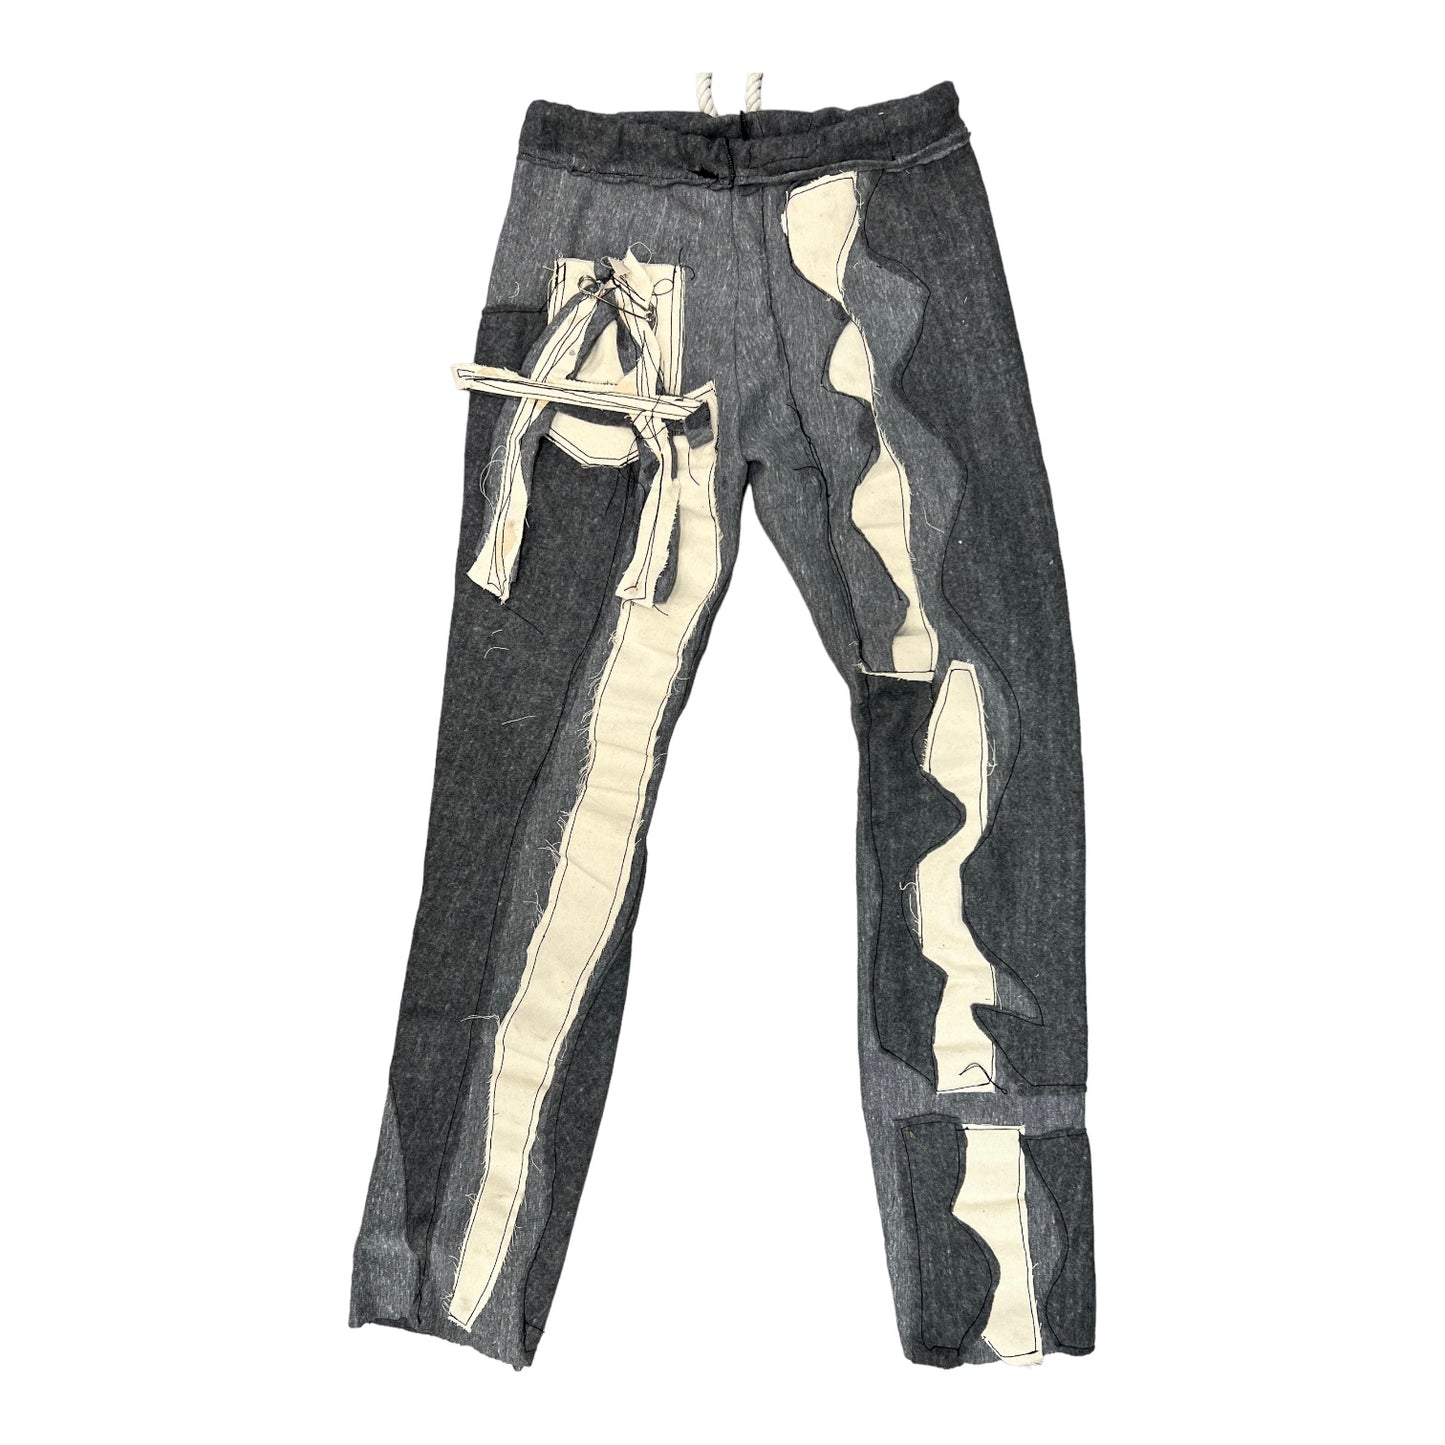 Haus of Chapo "Don't Sweat my canvas" Anarchy knit joggers